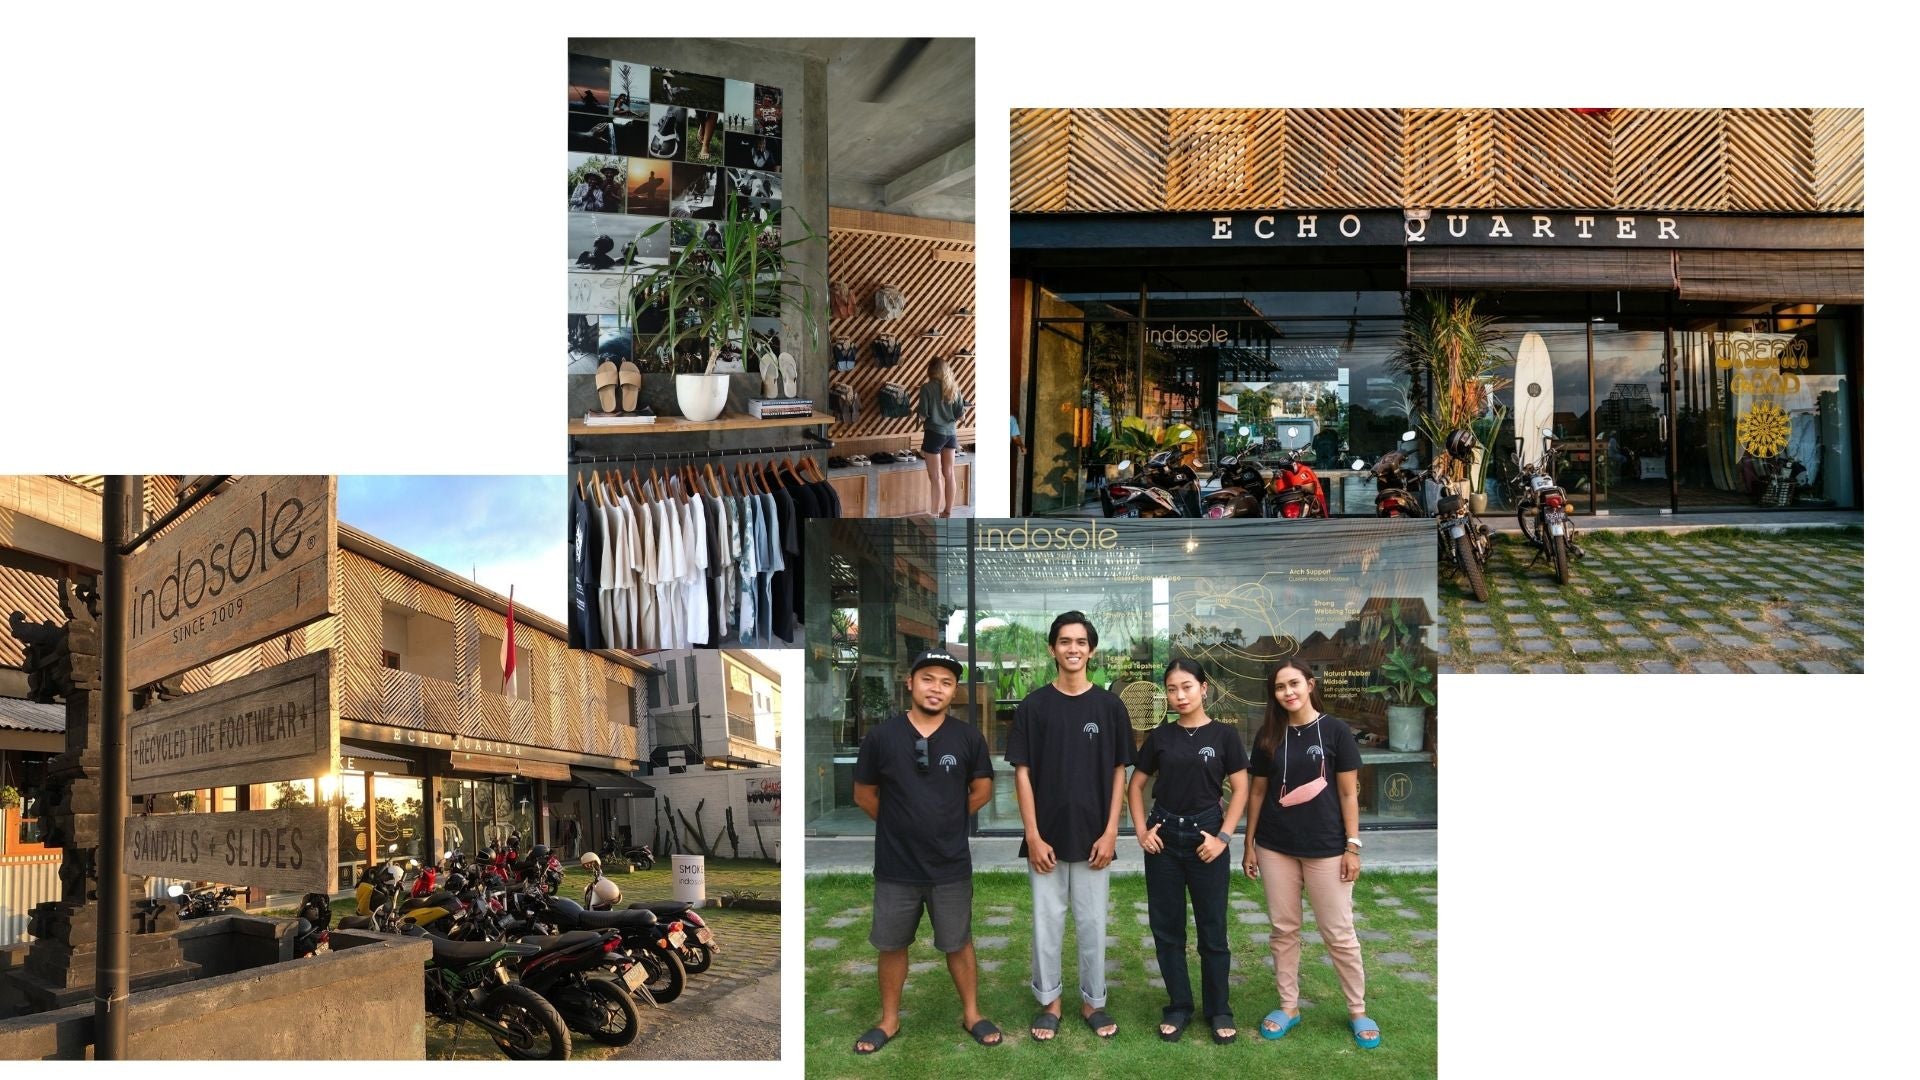 Storefront of Indosole’s Canggu, Bali location in Indonesia